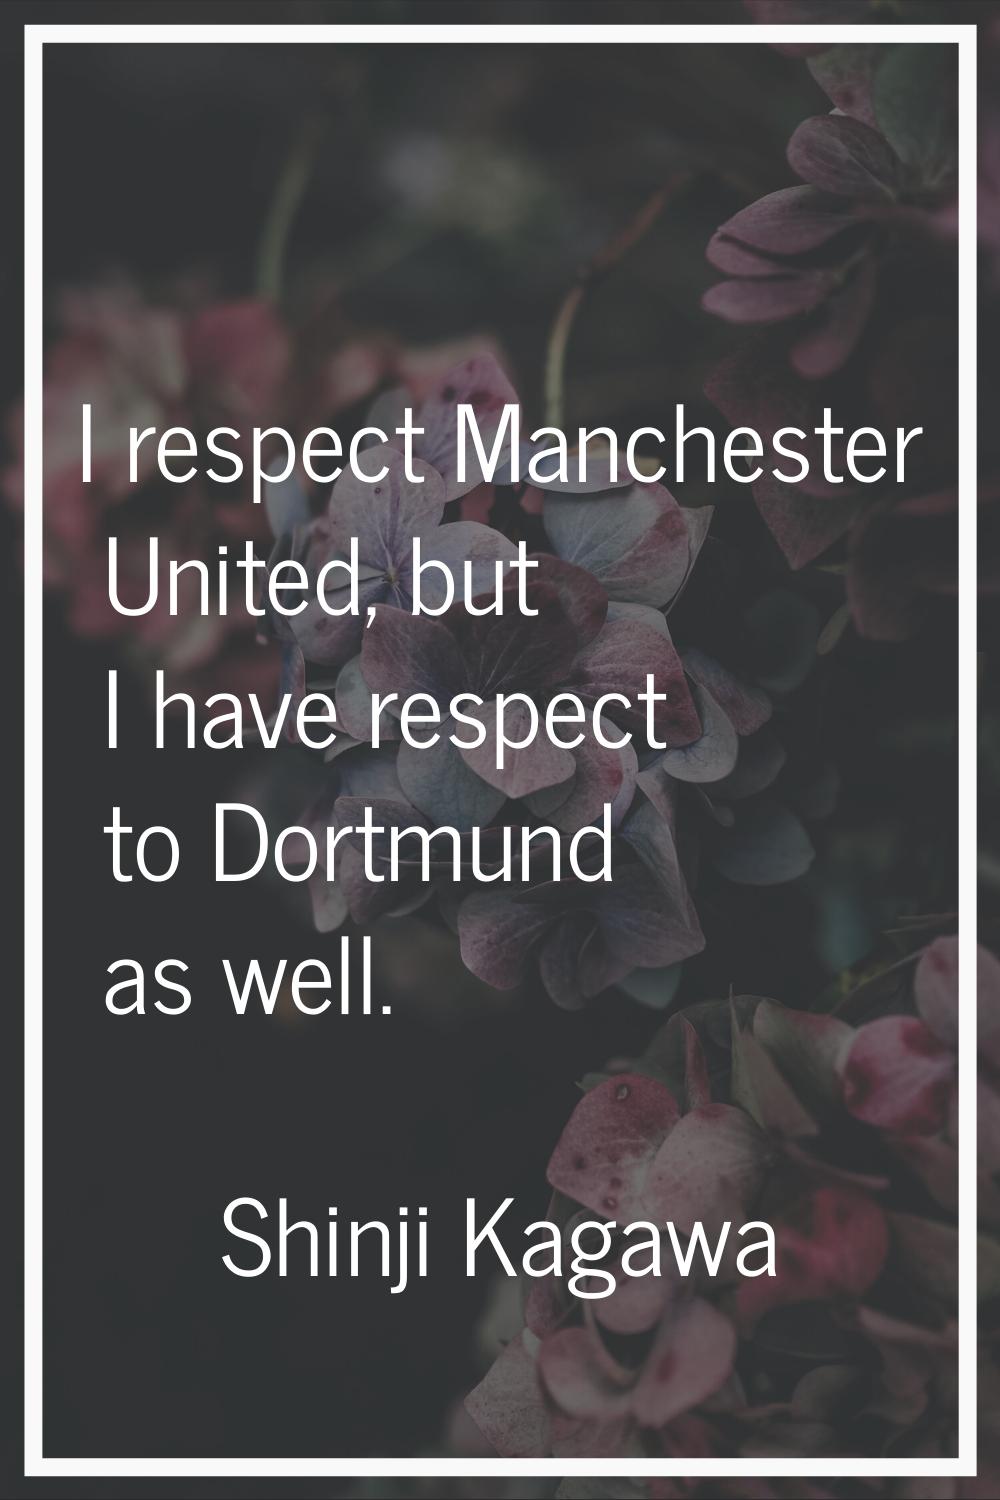 I respect Manchester United, but I have respect to Dortmund as well.